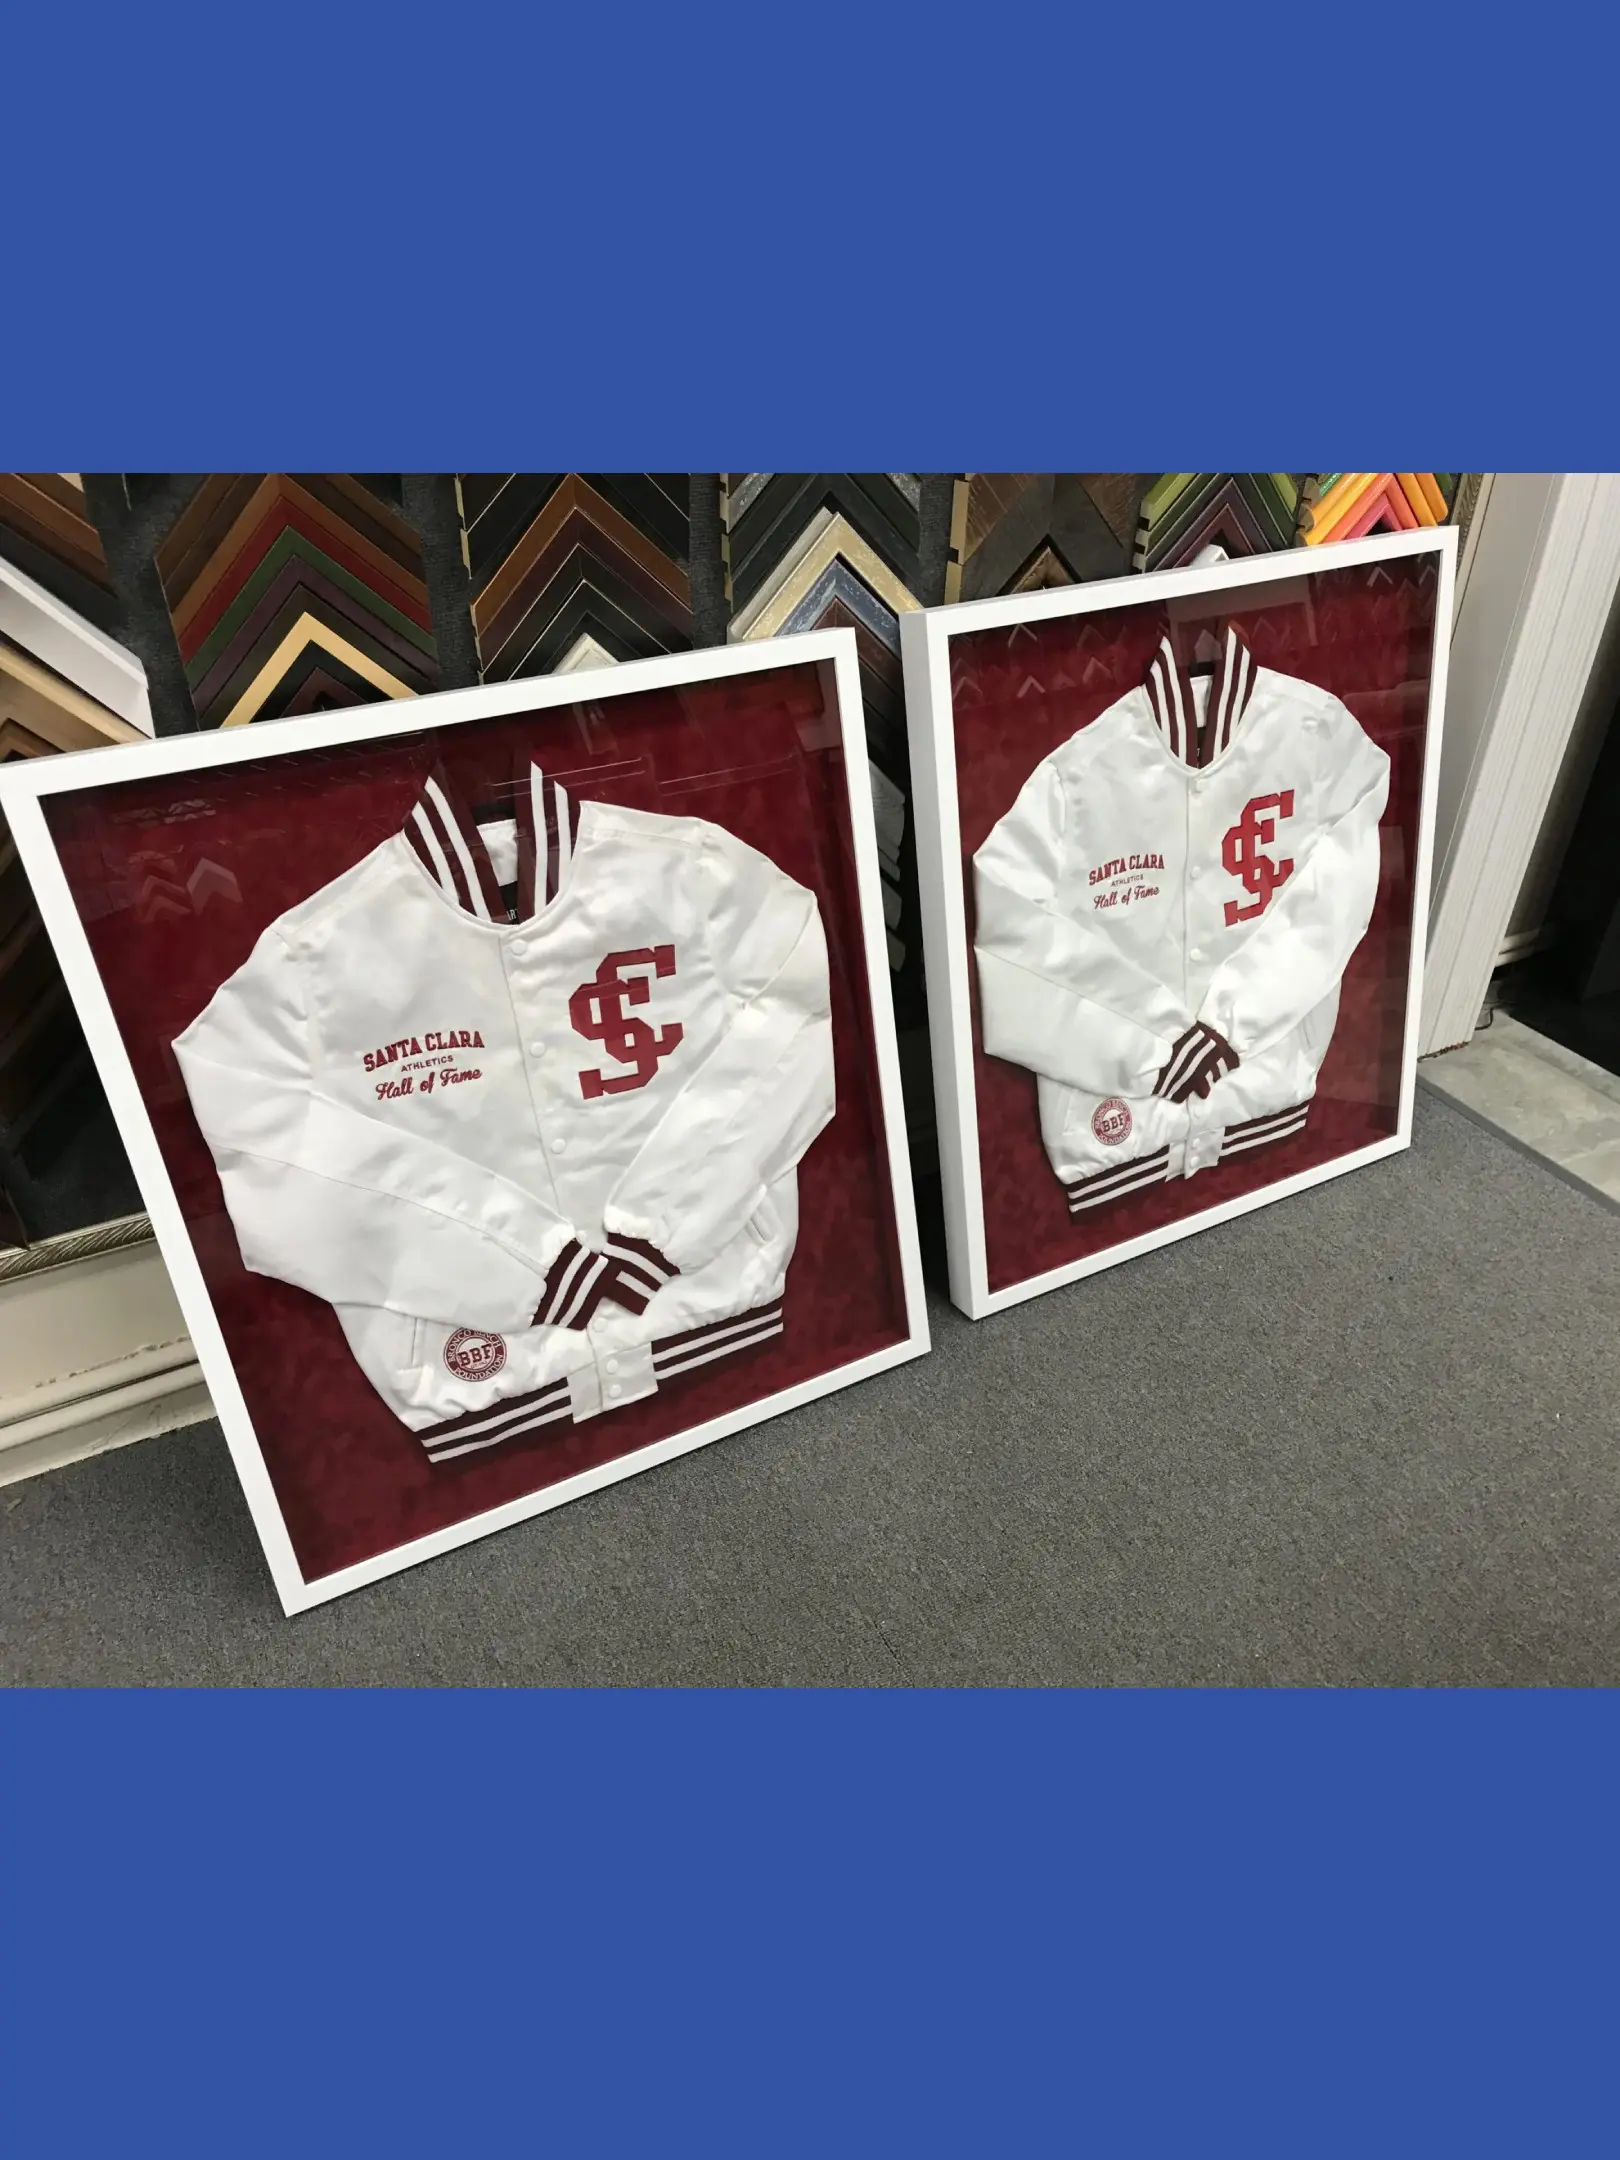 Two framed jackets are sitting on the floor.